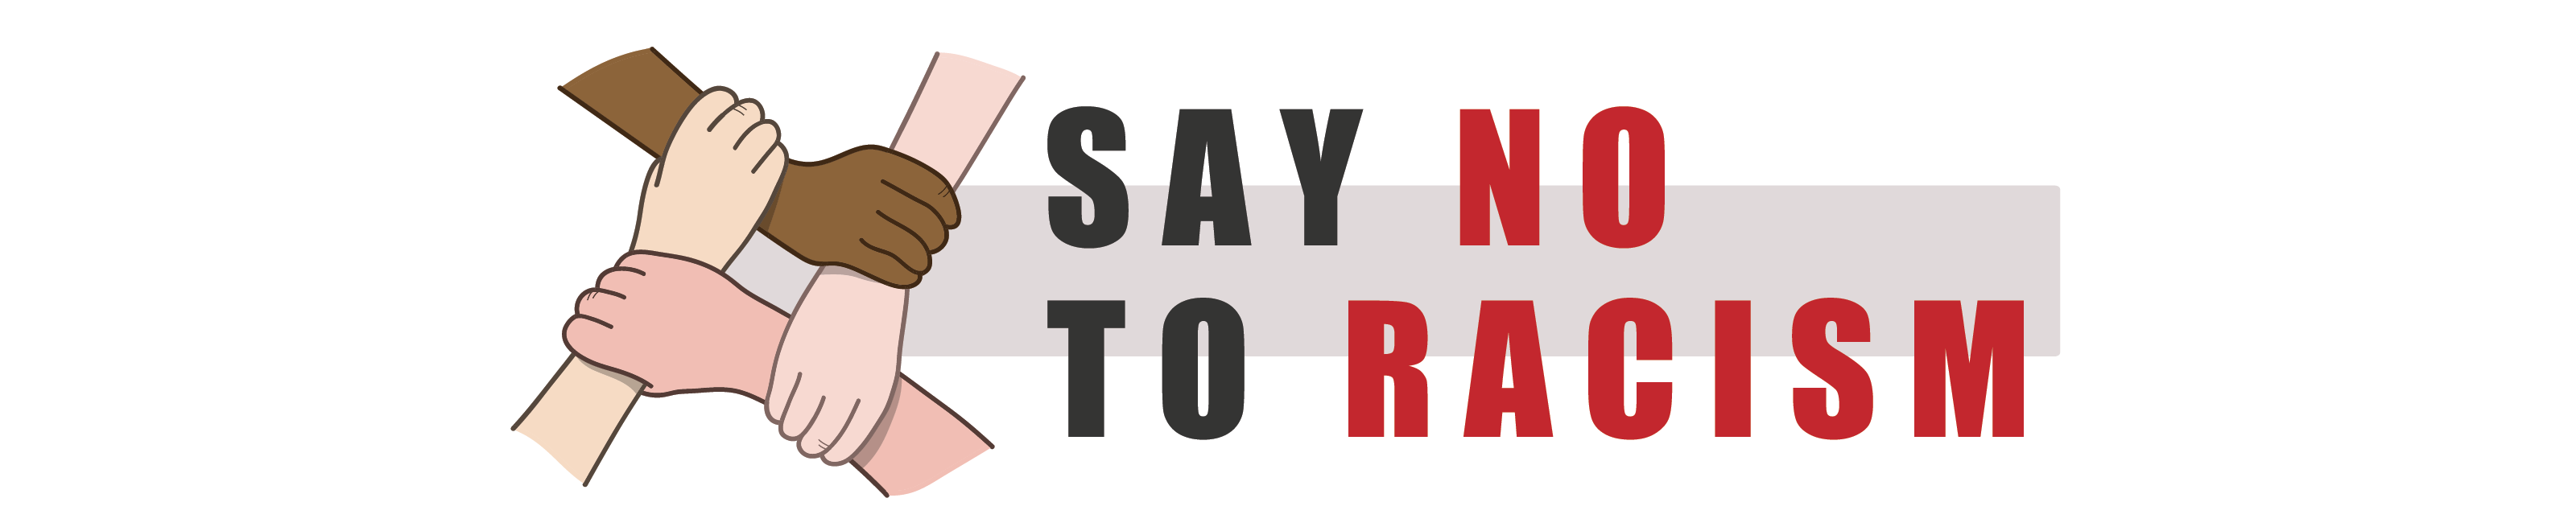 Four diverse, illustrated hands linked together with the text “Say No to Racism.”